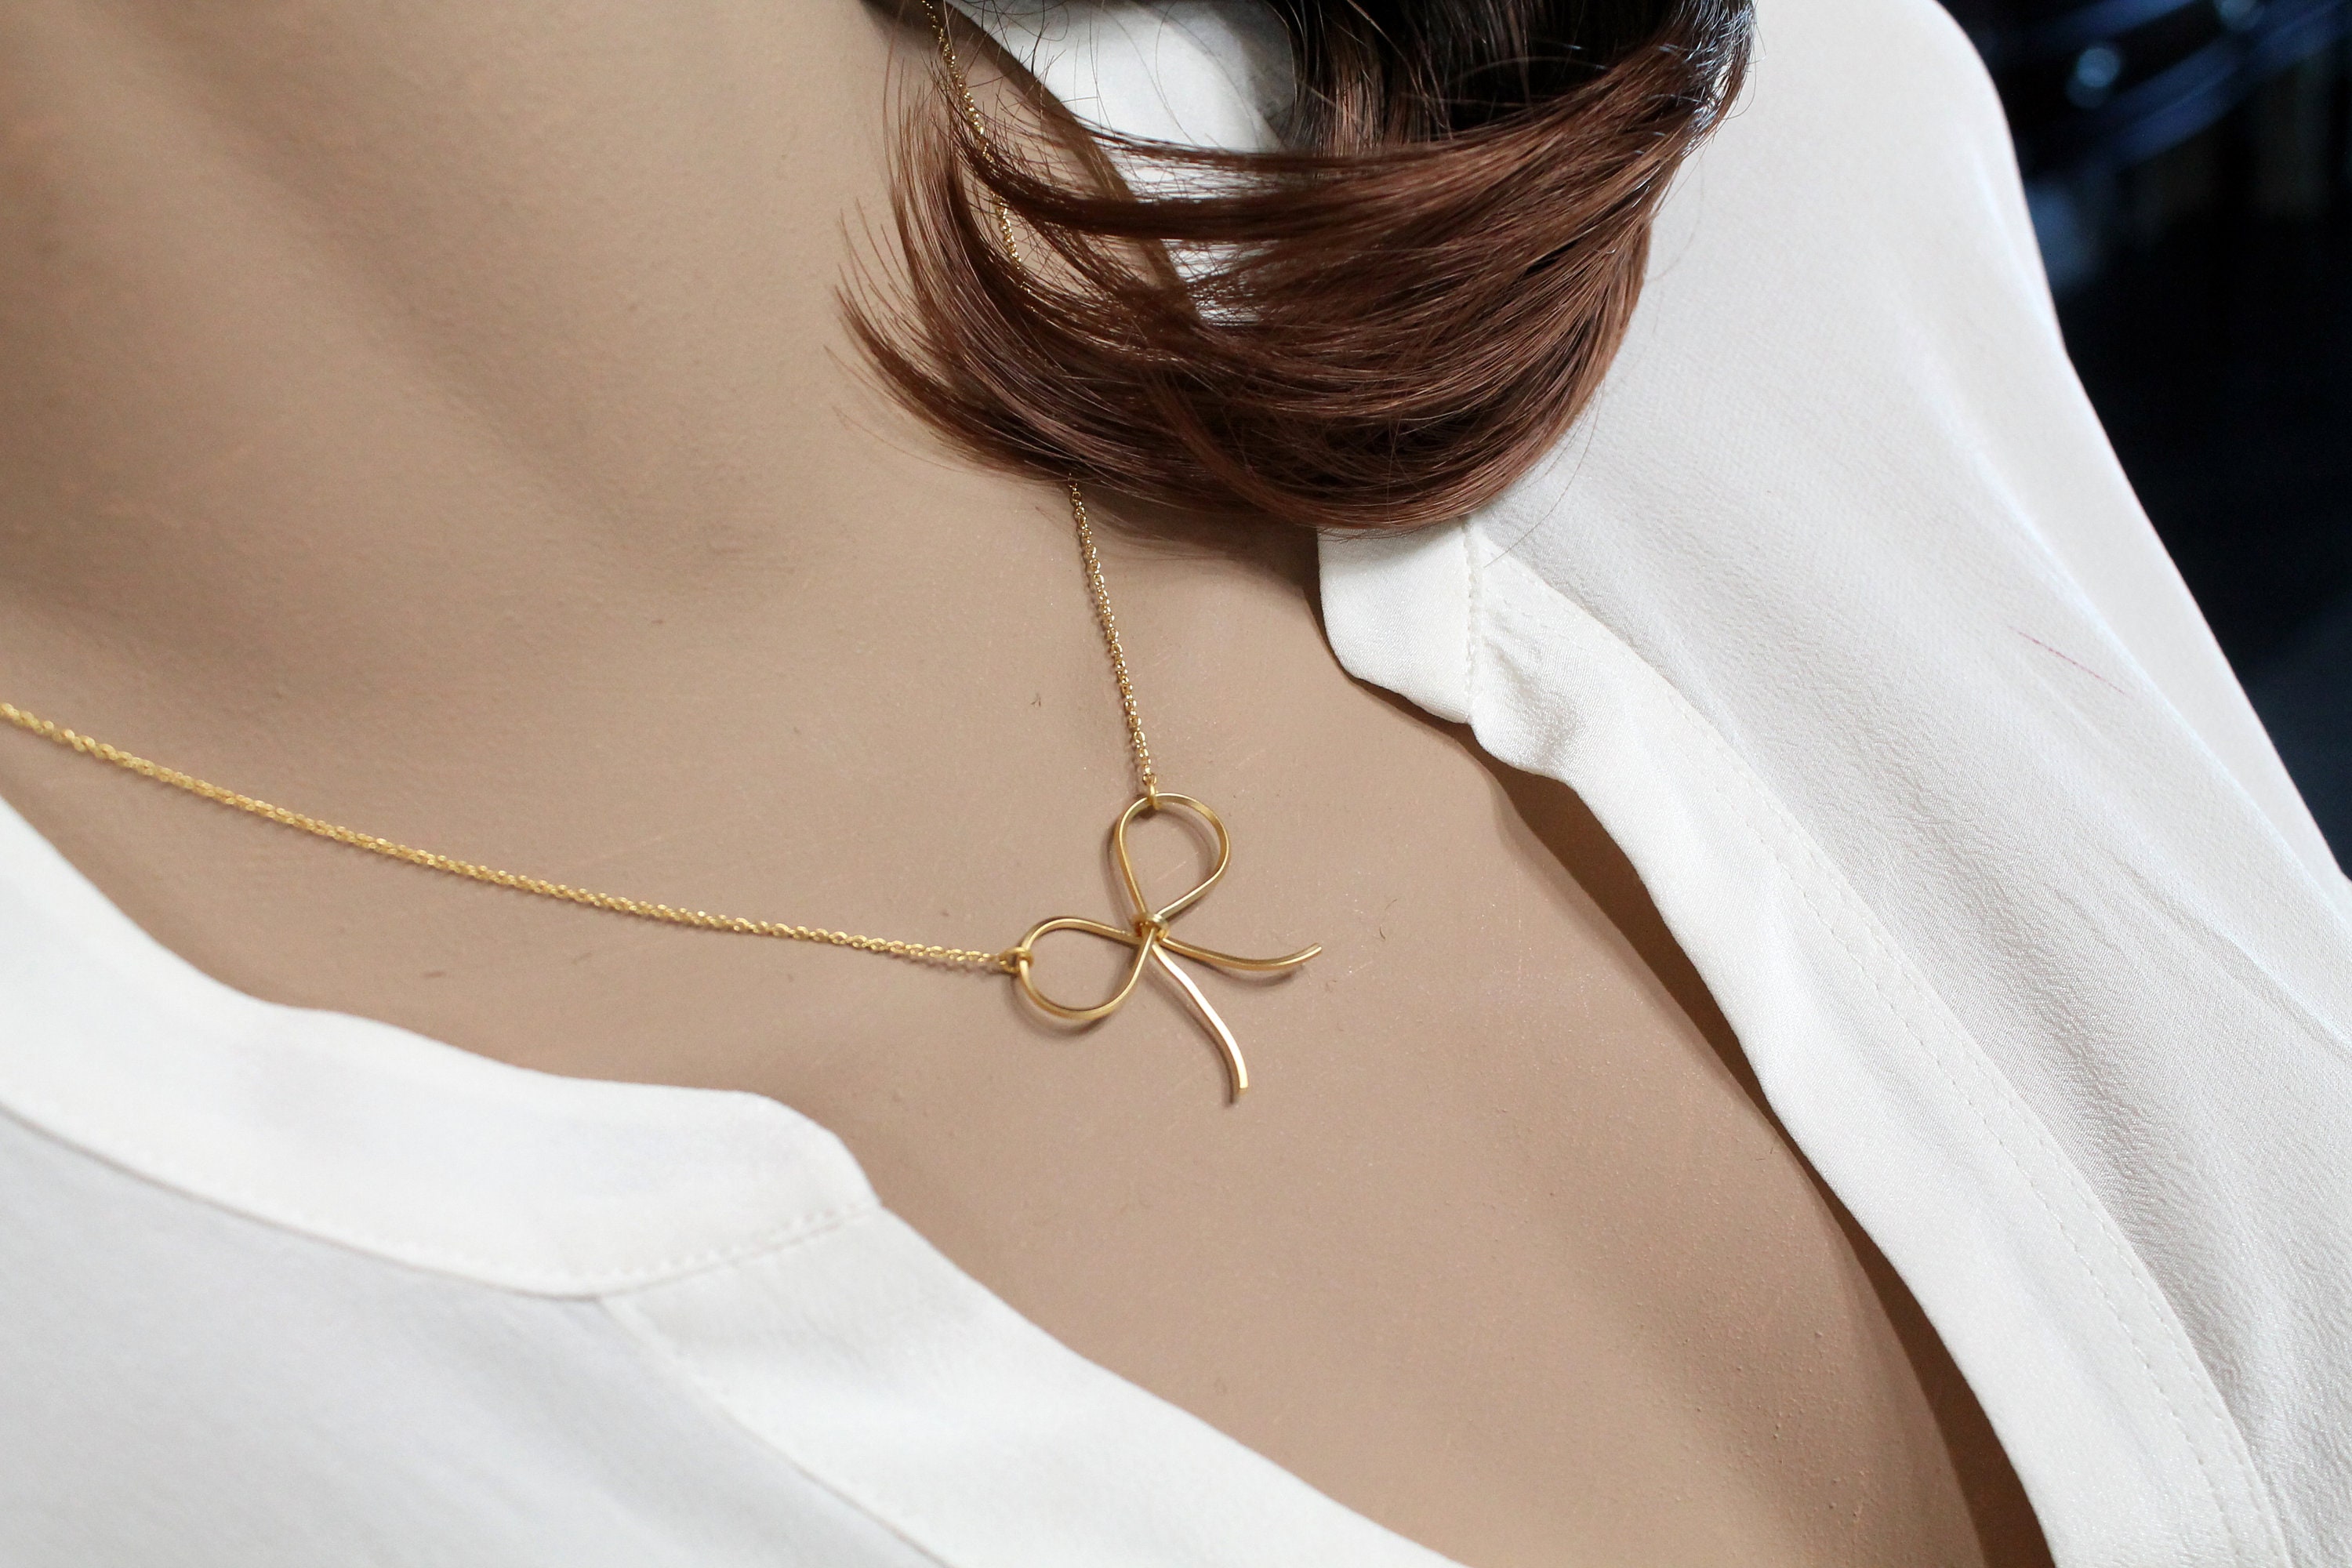 14K Solid Gold Bow Necklace / Dainty Bow/ Bow Necklace With Genuine Natural  Diamonds/ Gift for Mom / Gift for Her 